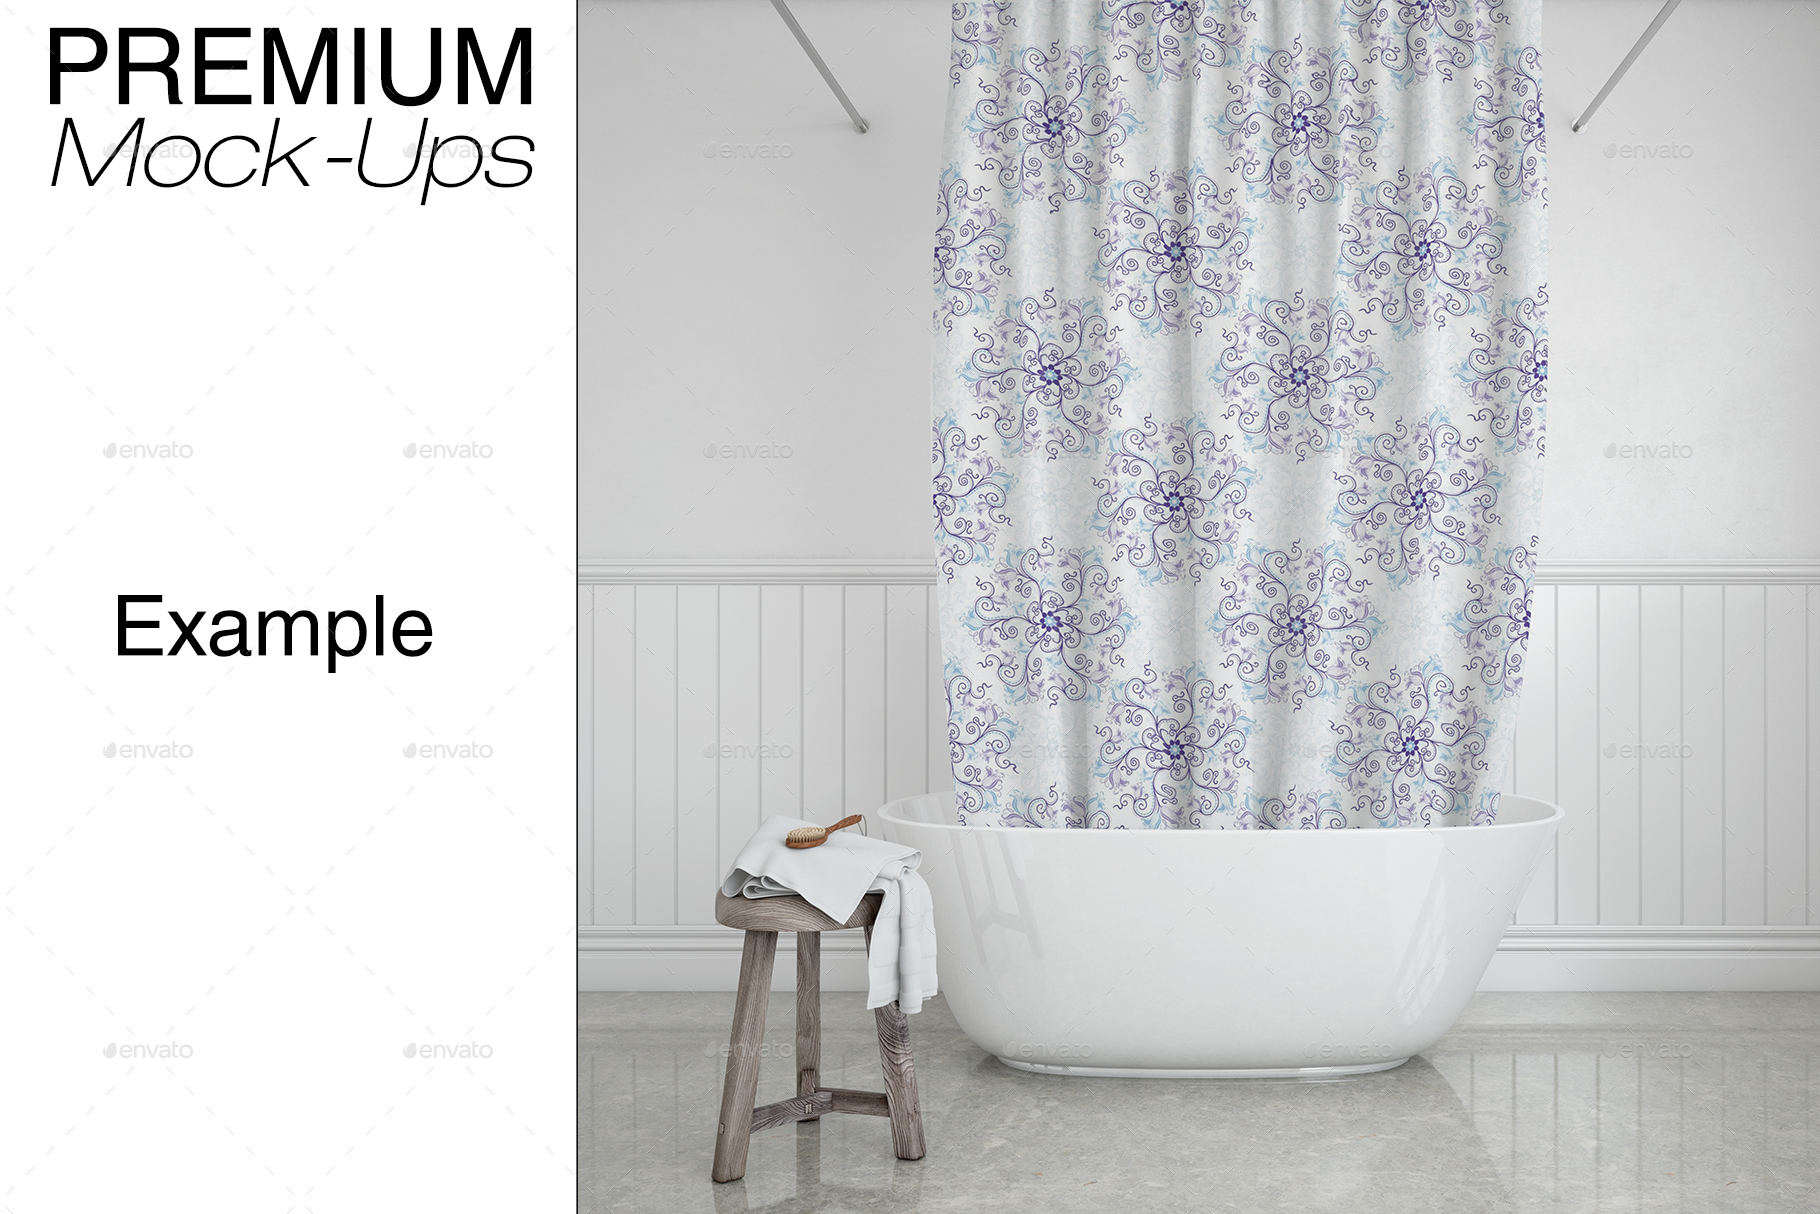 Bath Curtain Mockup Pack by mock-ups | GraphicRiver